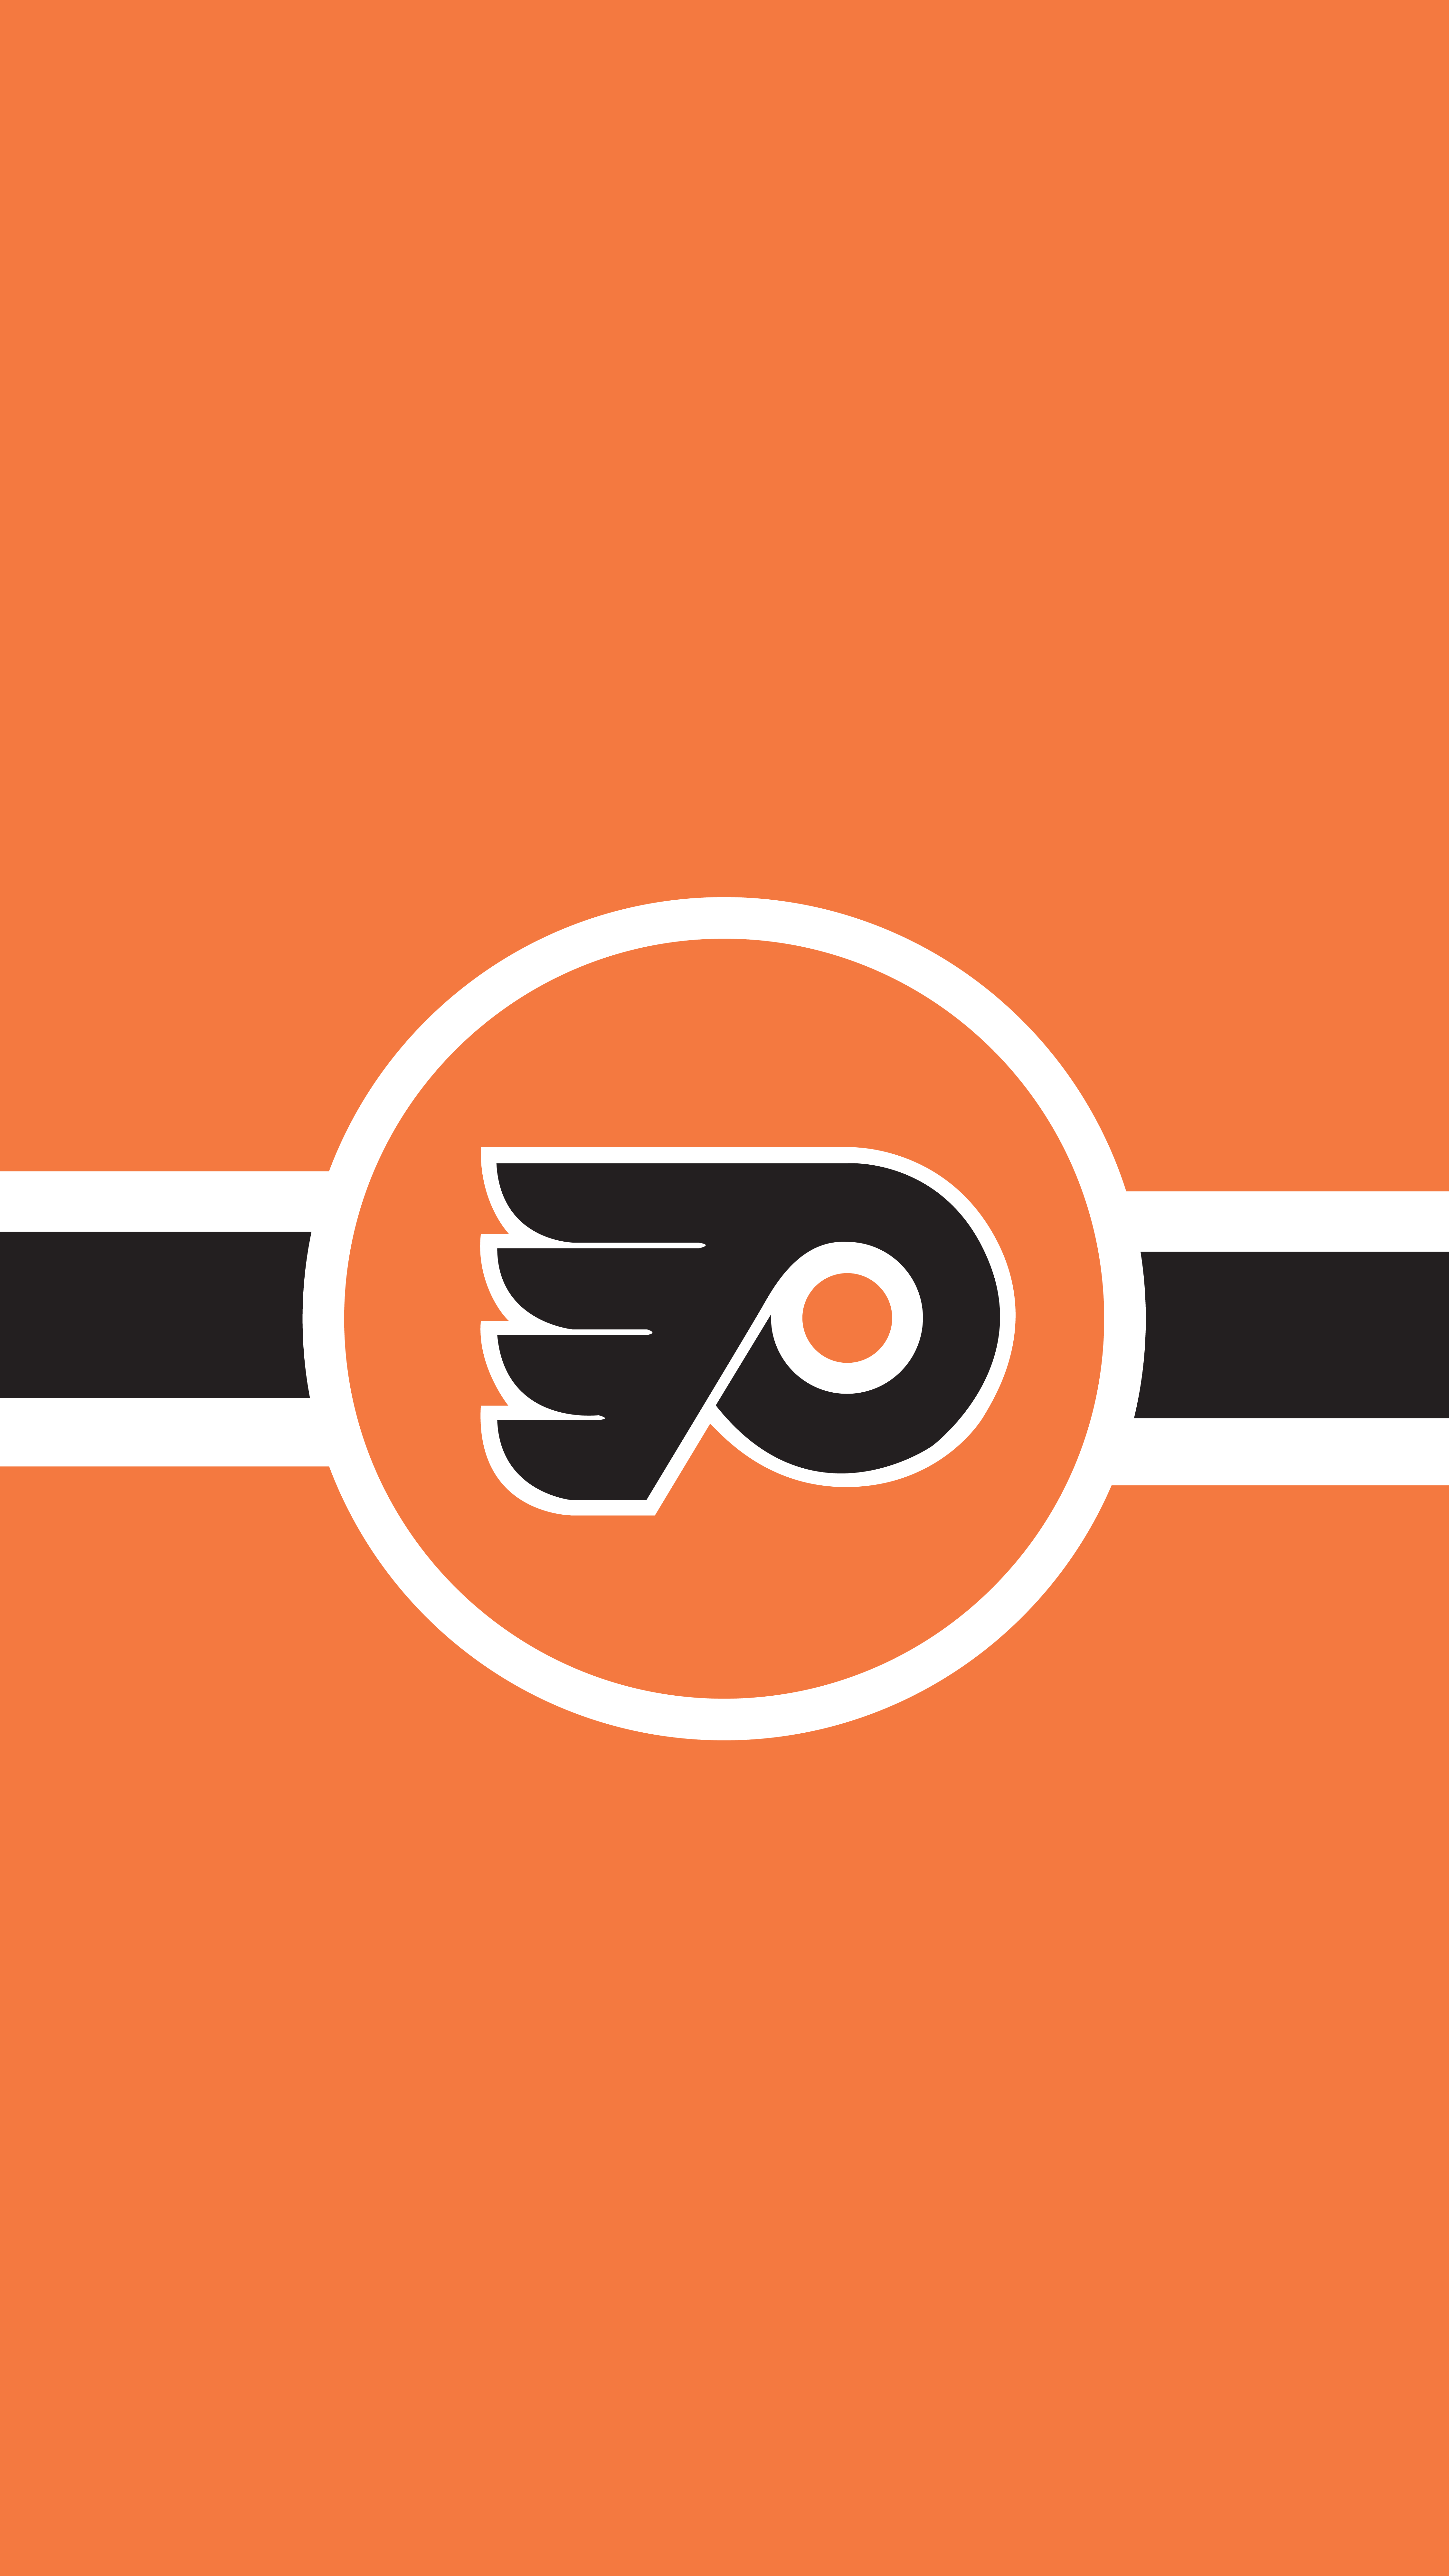 Flyers Iphone Wallpapers